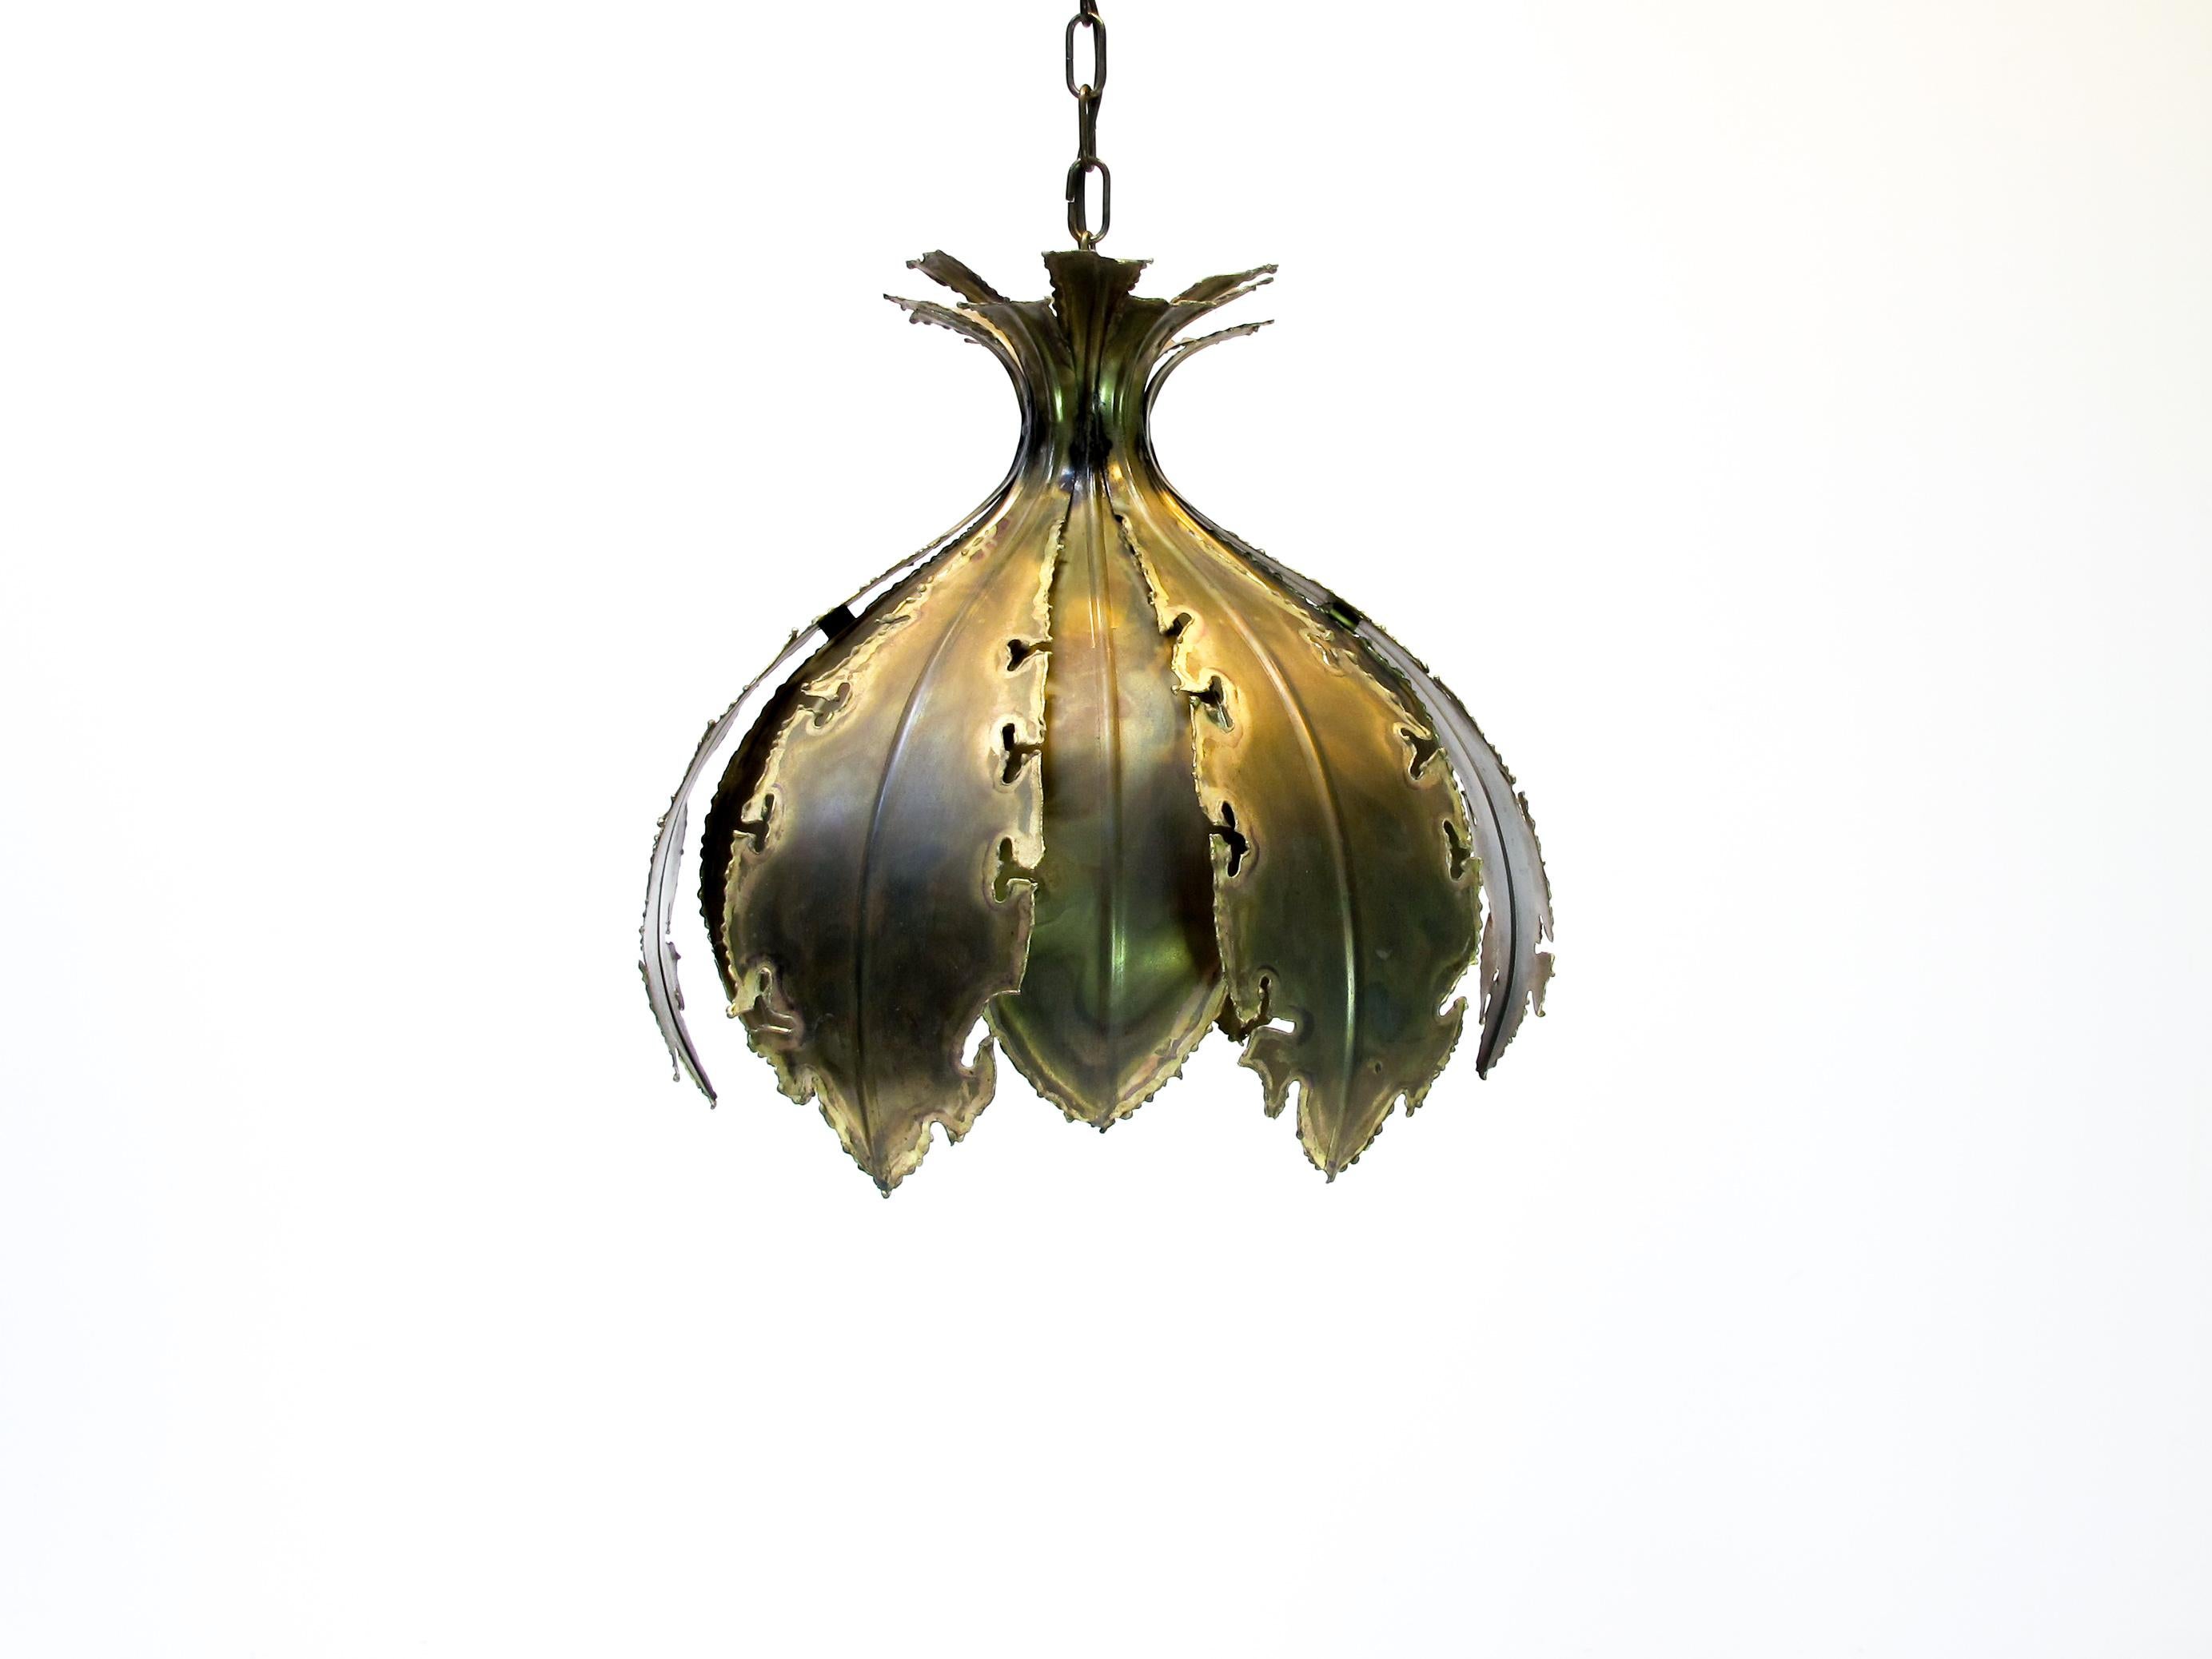 Flame cut brass pendant model 'Victoria' designed by Svend Aage Holm manufactured by Holm Sorensen & Co, 1970s.
  